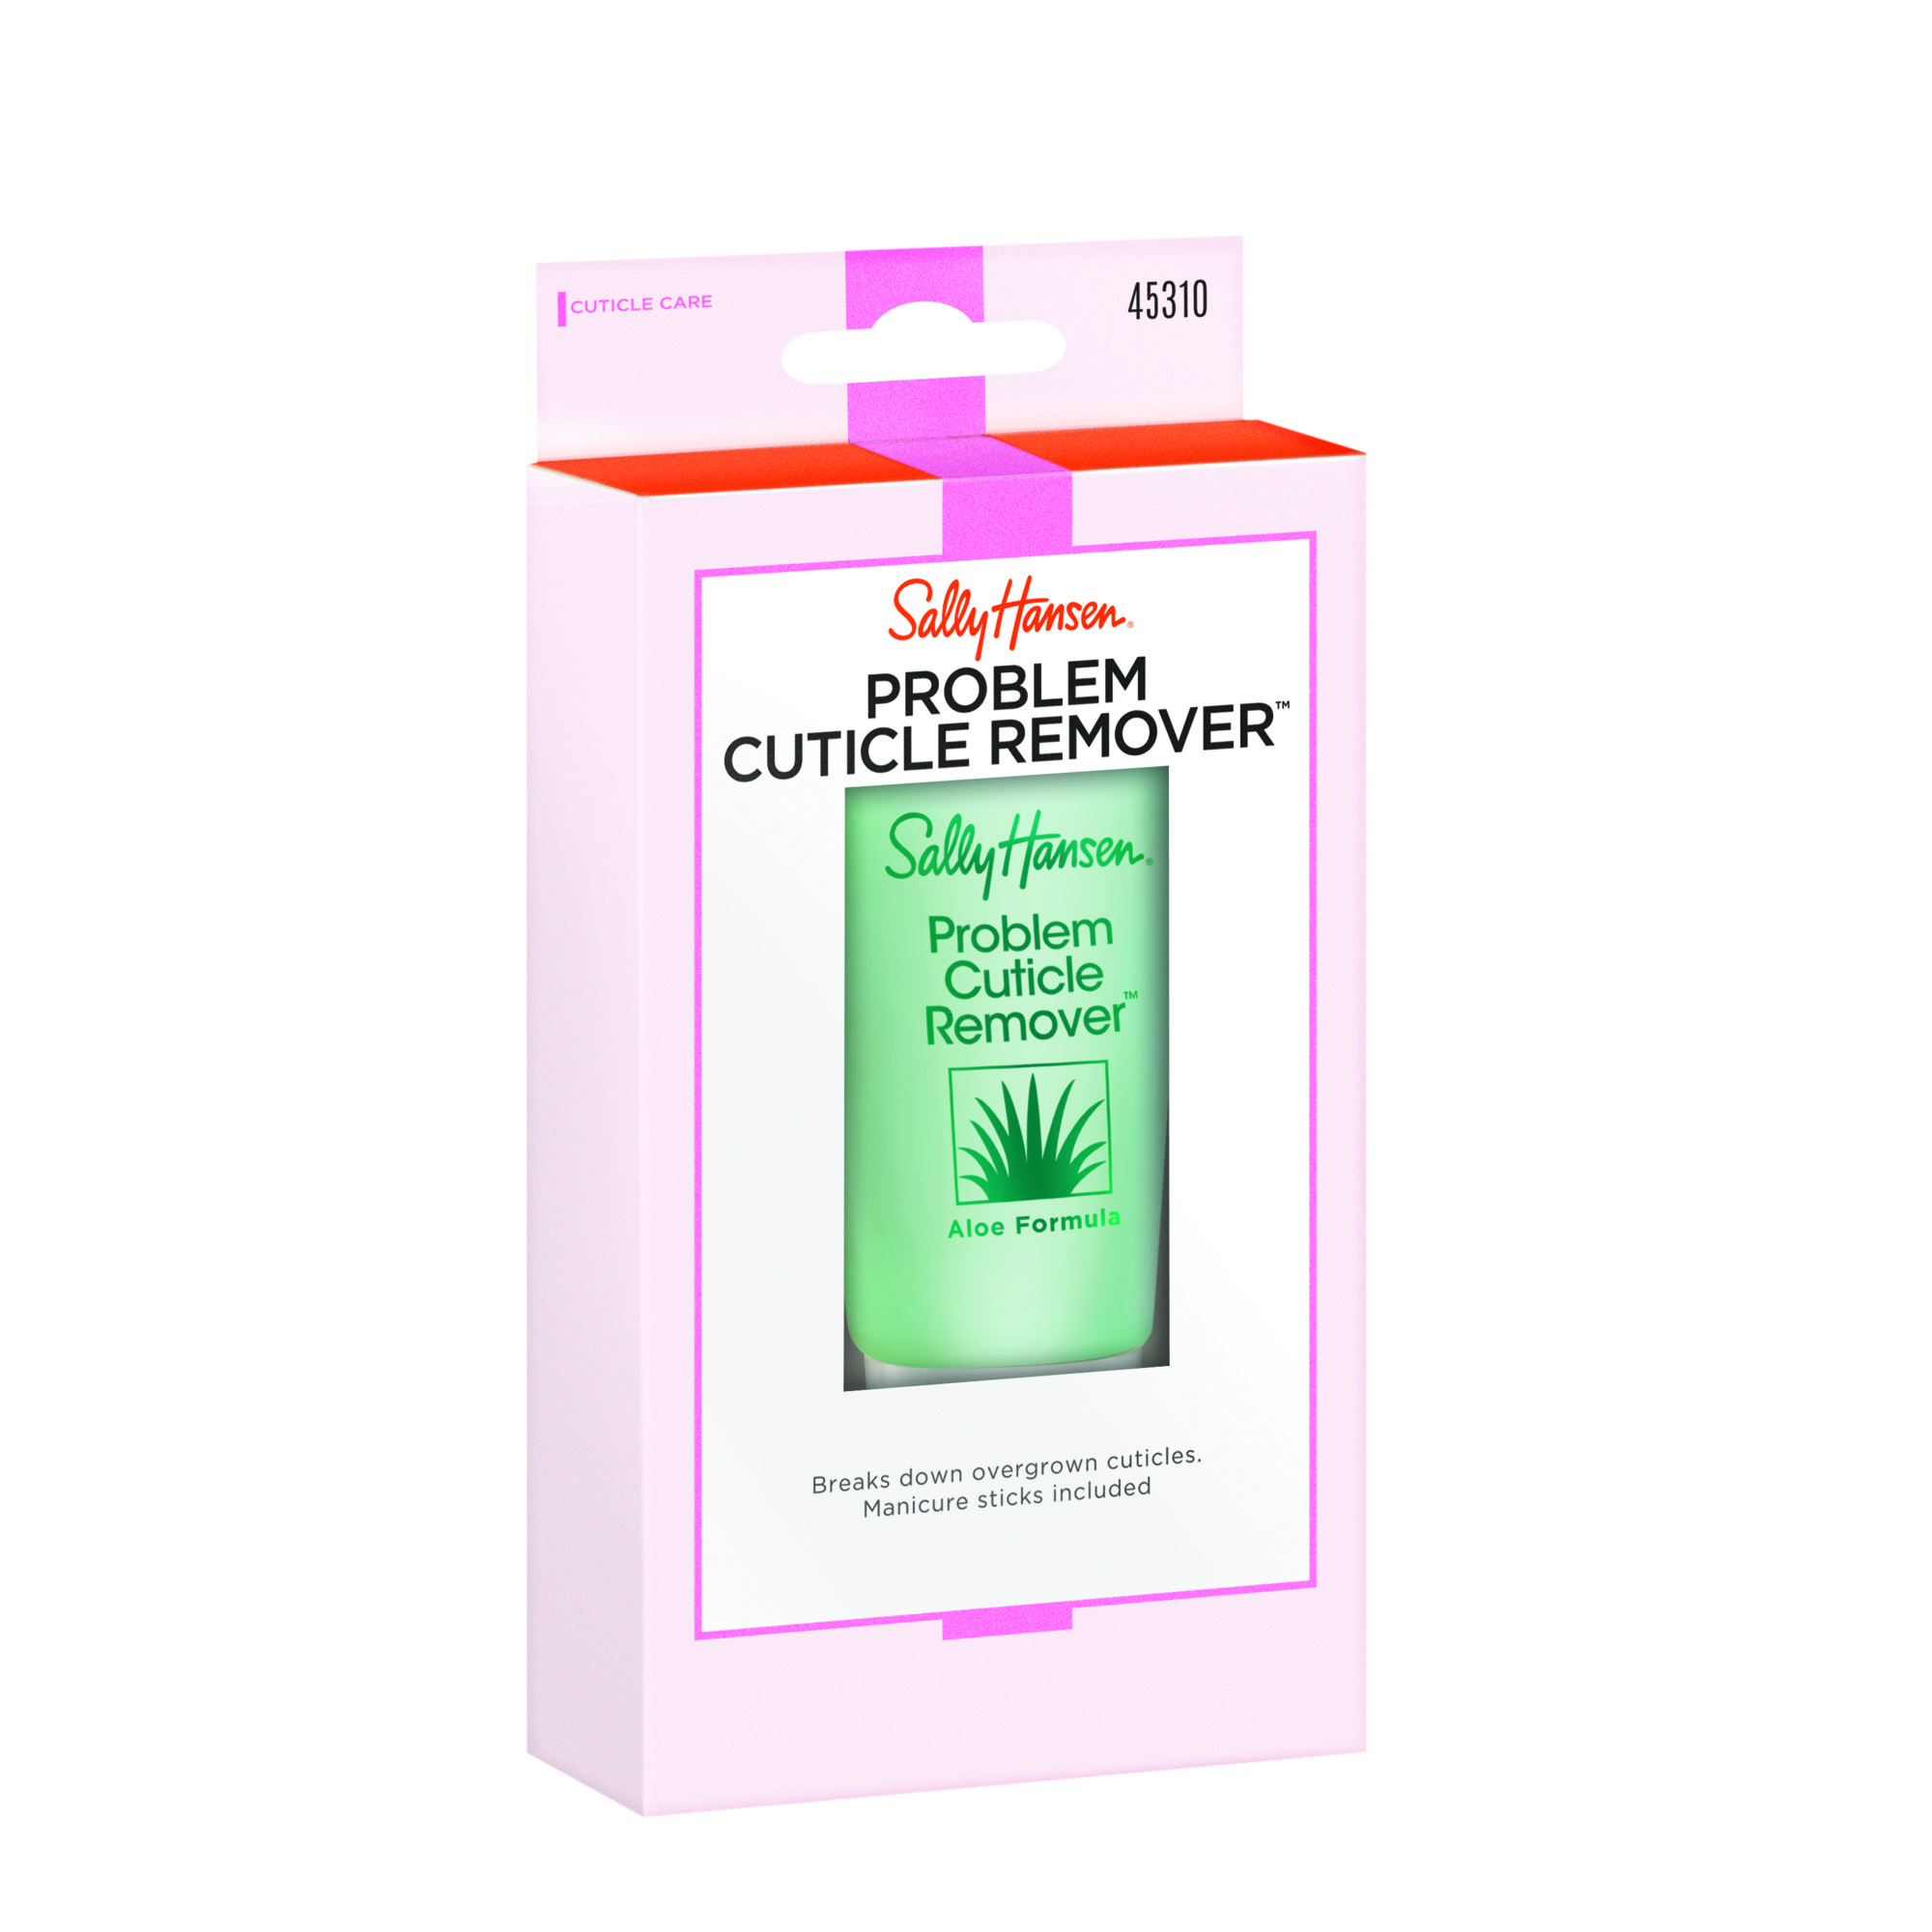 Sally Hansen Problem Cuticle Remover™, Eliminate Thick & Overgrown Cuticles, 1 Oz, Cuticle Remover Cream, Cuticle Remover Gel, Ph Balance Formula, Infused with Aloe Vera to Soothe and Condition - image 2 of 3